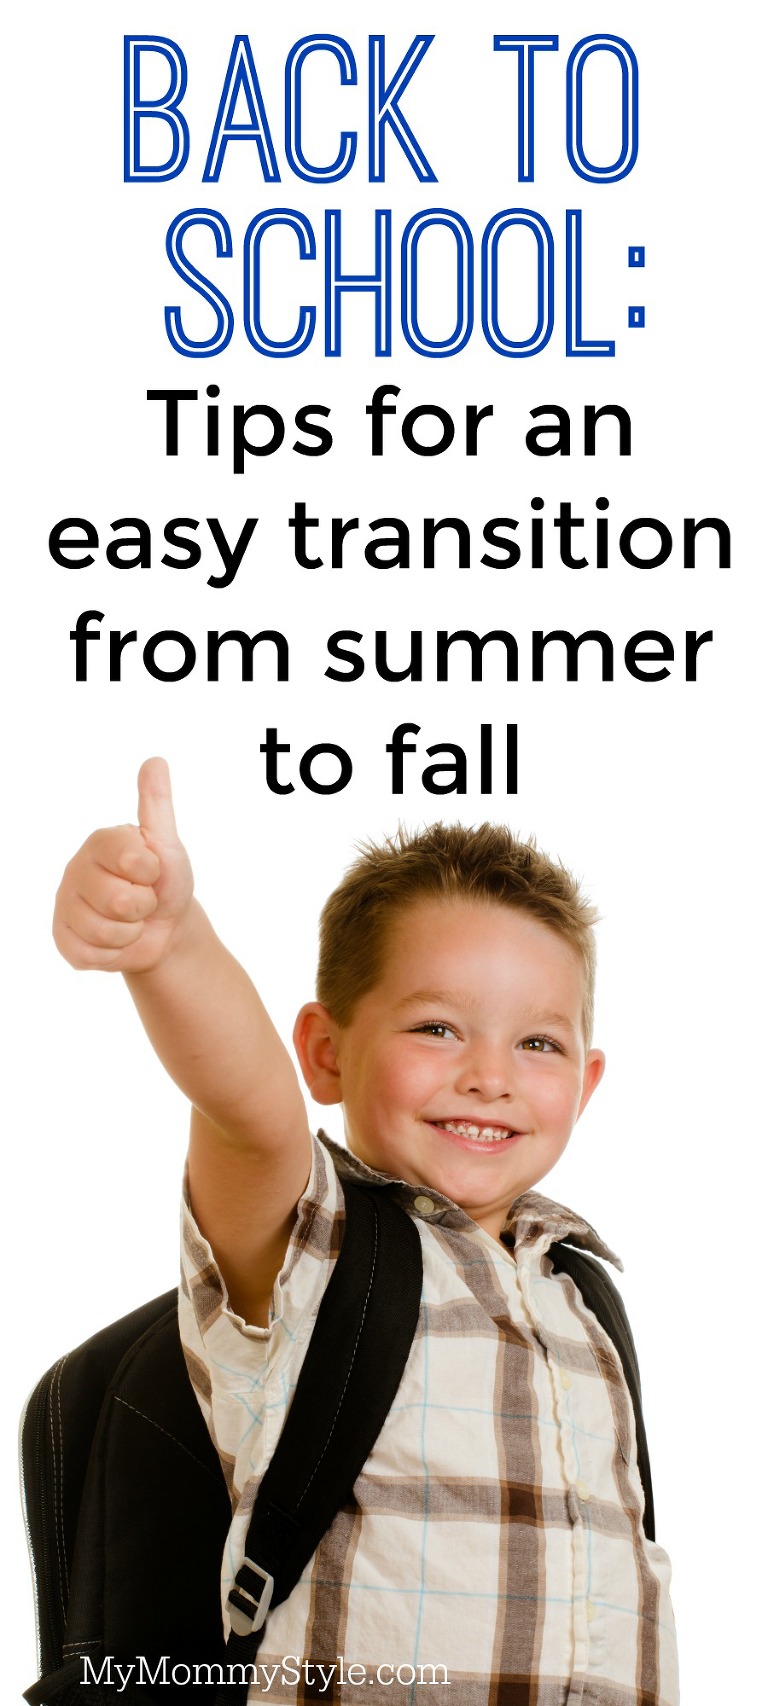 Back to school- tips for an easy transition from summer to fall